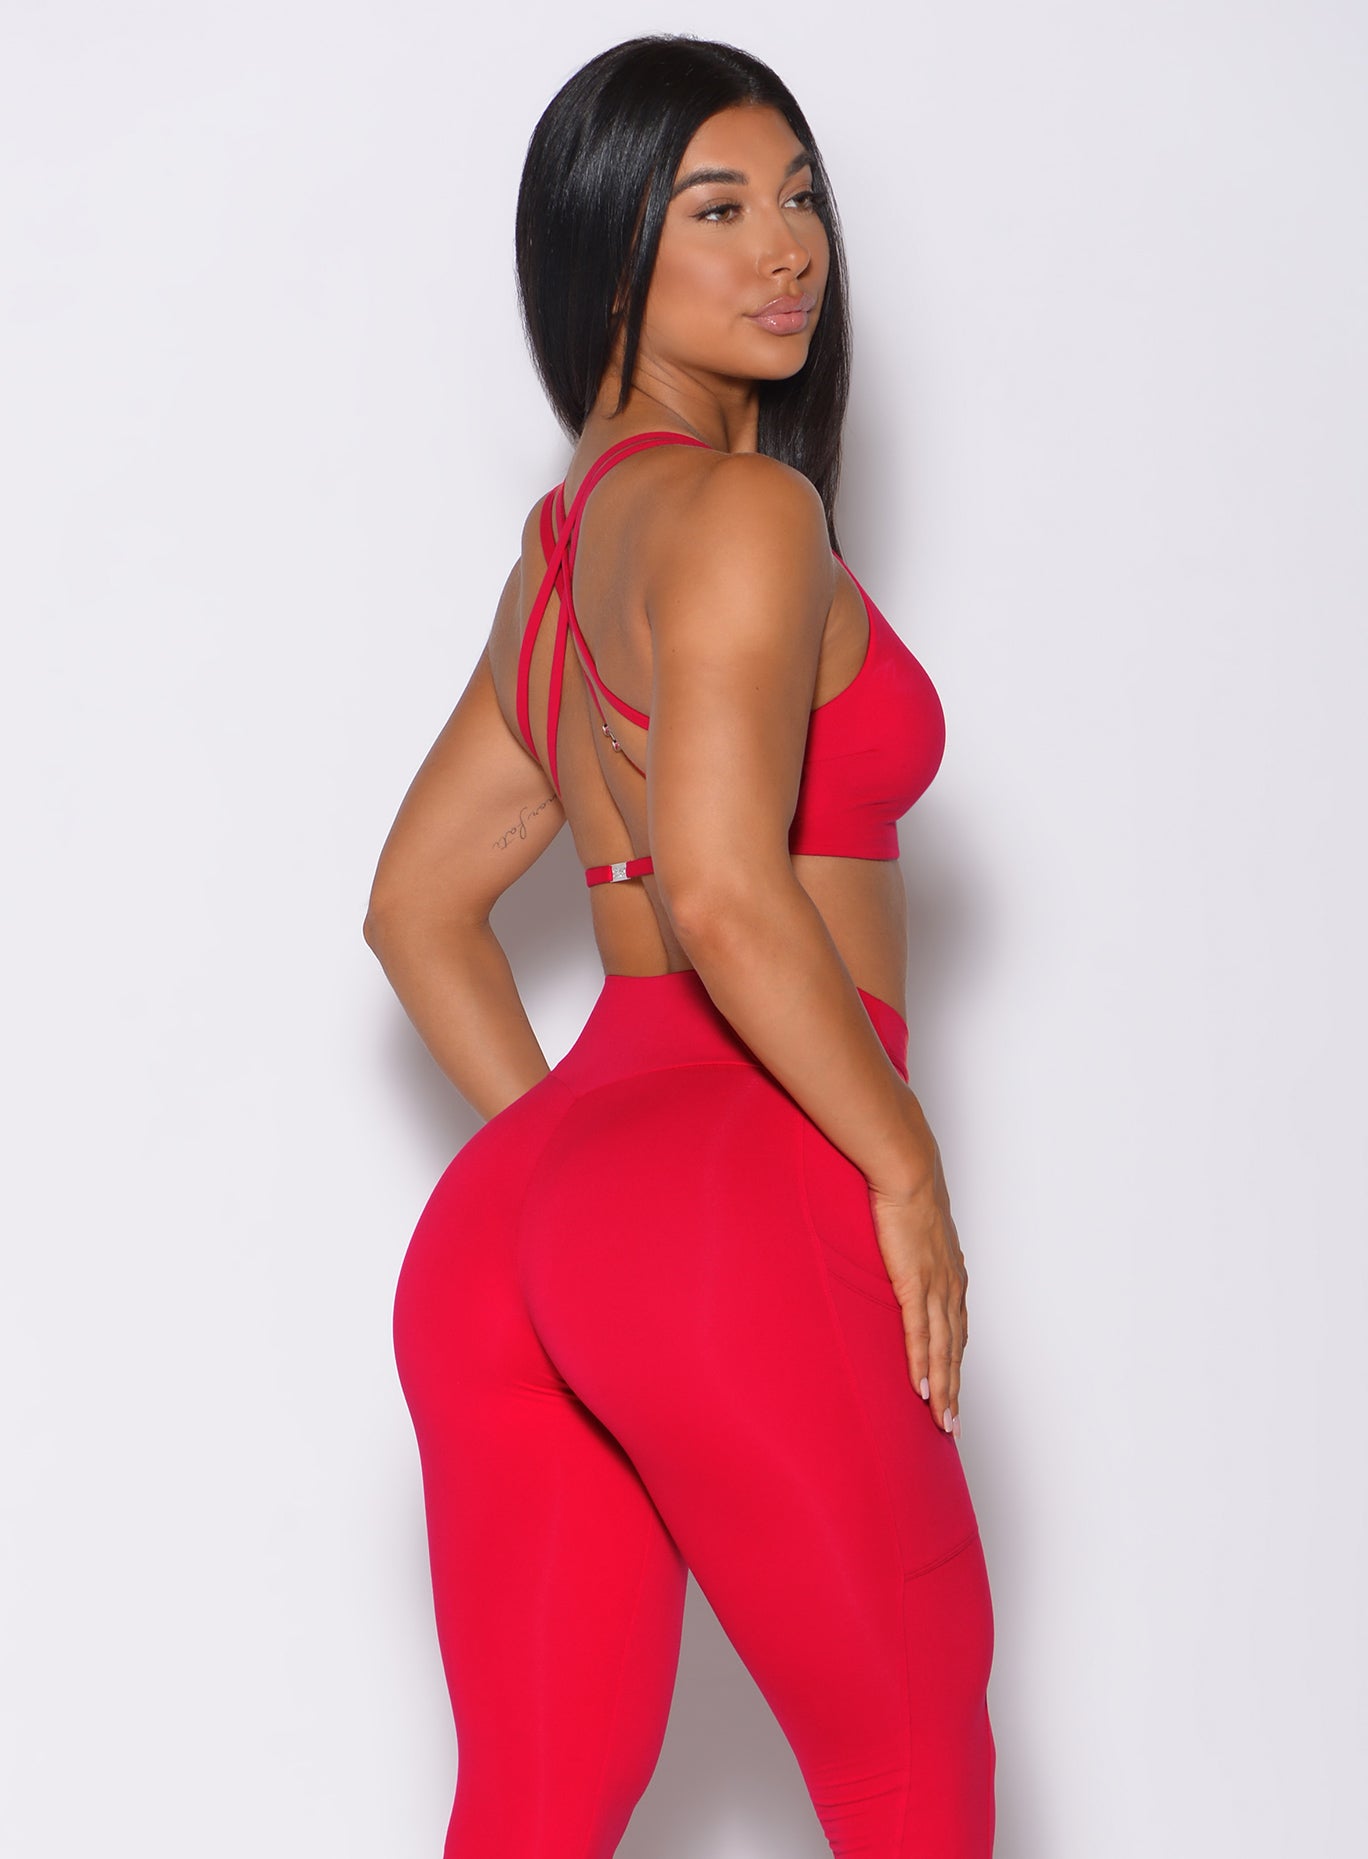 Right side profile view of a model wearing our red barbell sports bra and a matching leggings